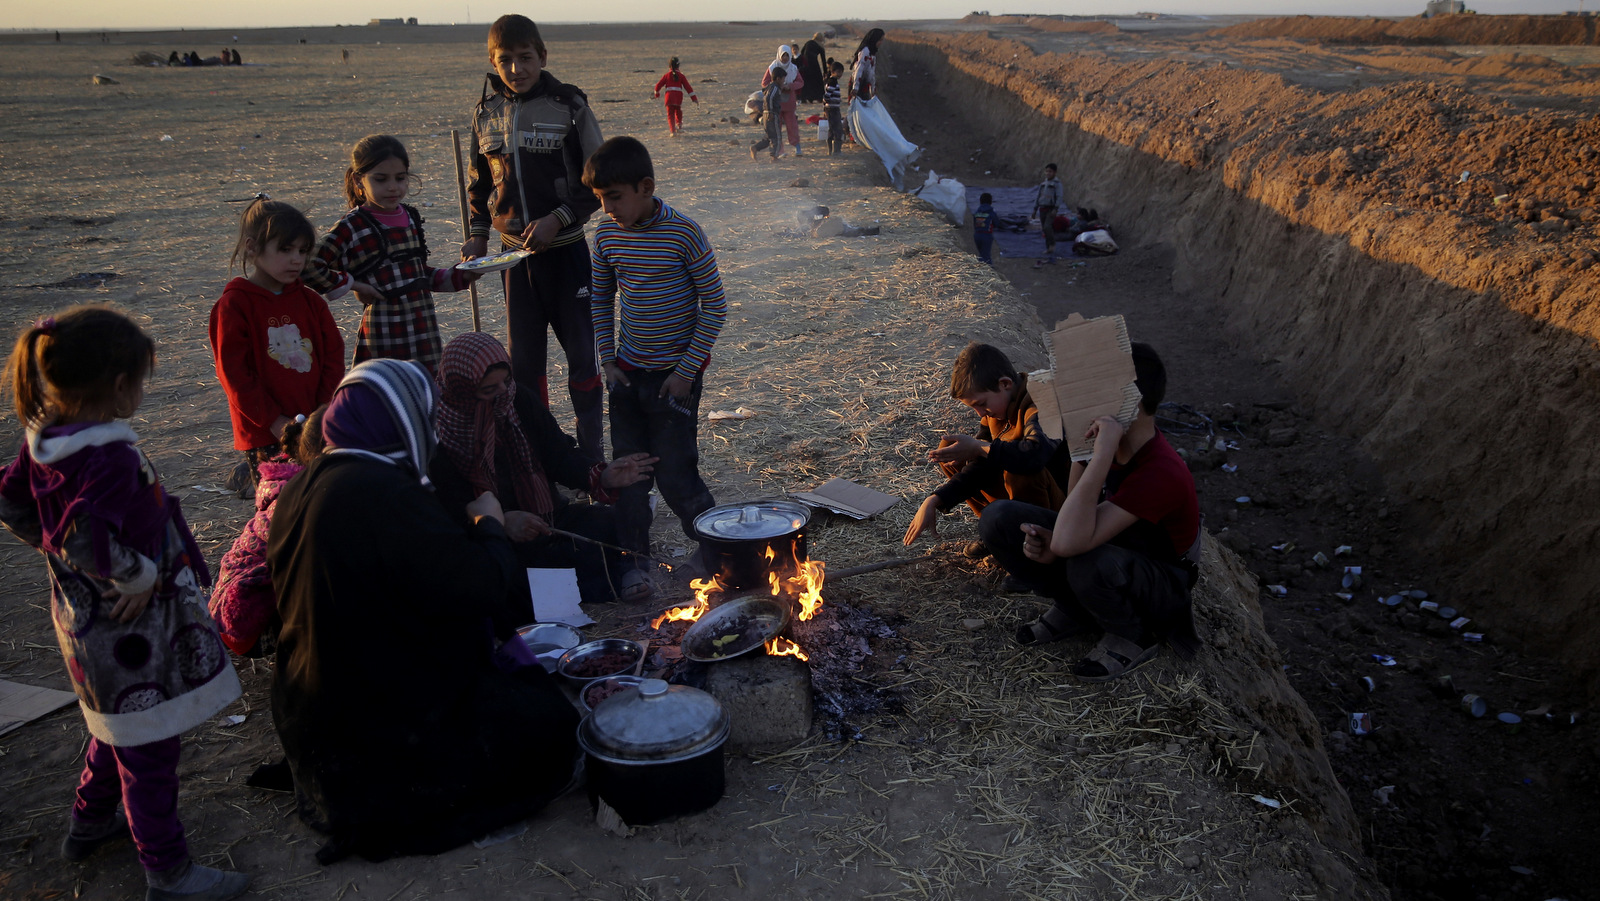 Families who fled ISIS cook next to a trench created by Kurdish forces to demarcate their border, as they wait to cross to the Kurdish areas, in the Nineveh plain, northeast of Mosul. The sand berms and trenches snake across northern Iraq into Syria, alongside newly paved roads and sprawling checkpoints decked with Kurdish flags, in what increasingly resembles an international border. (AP/Hussein Malla)